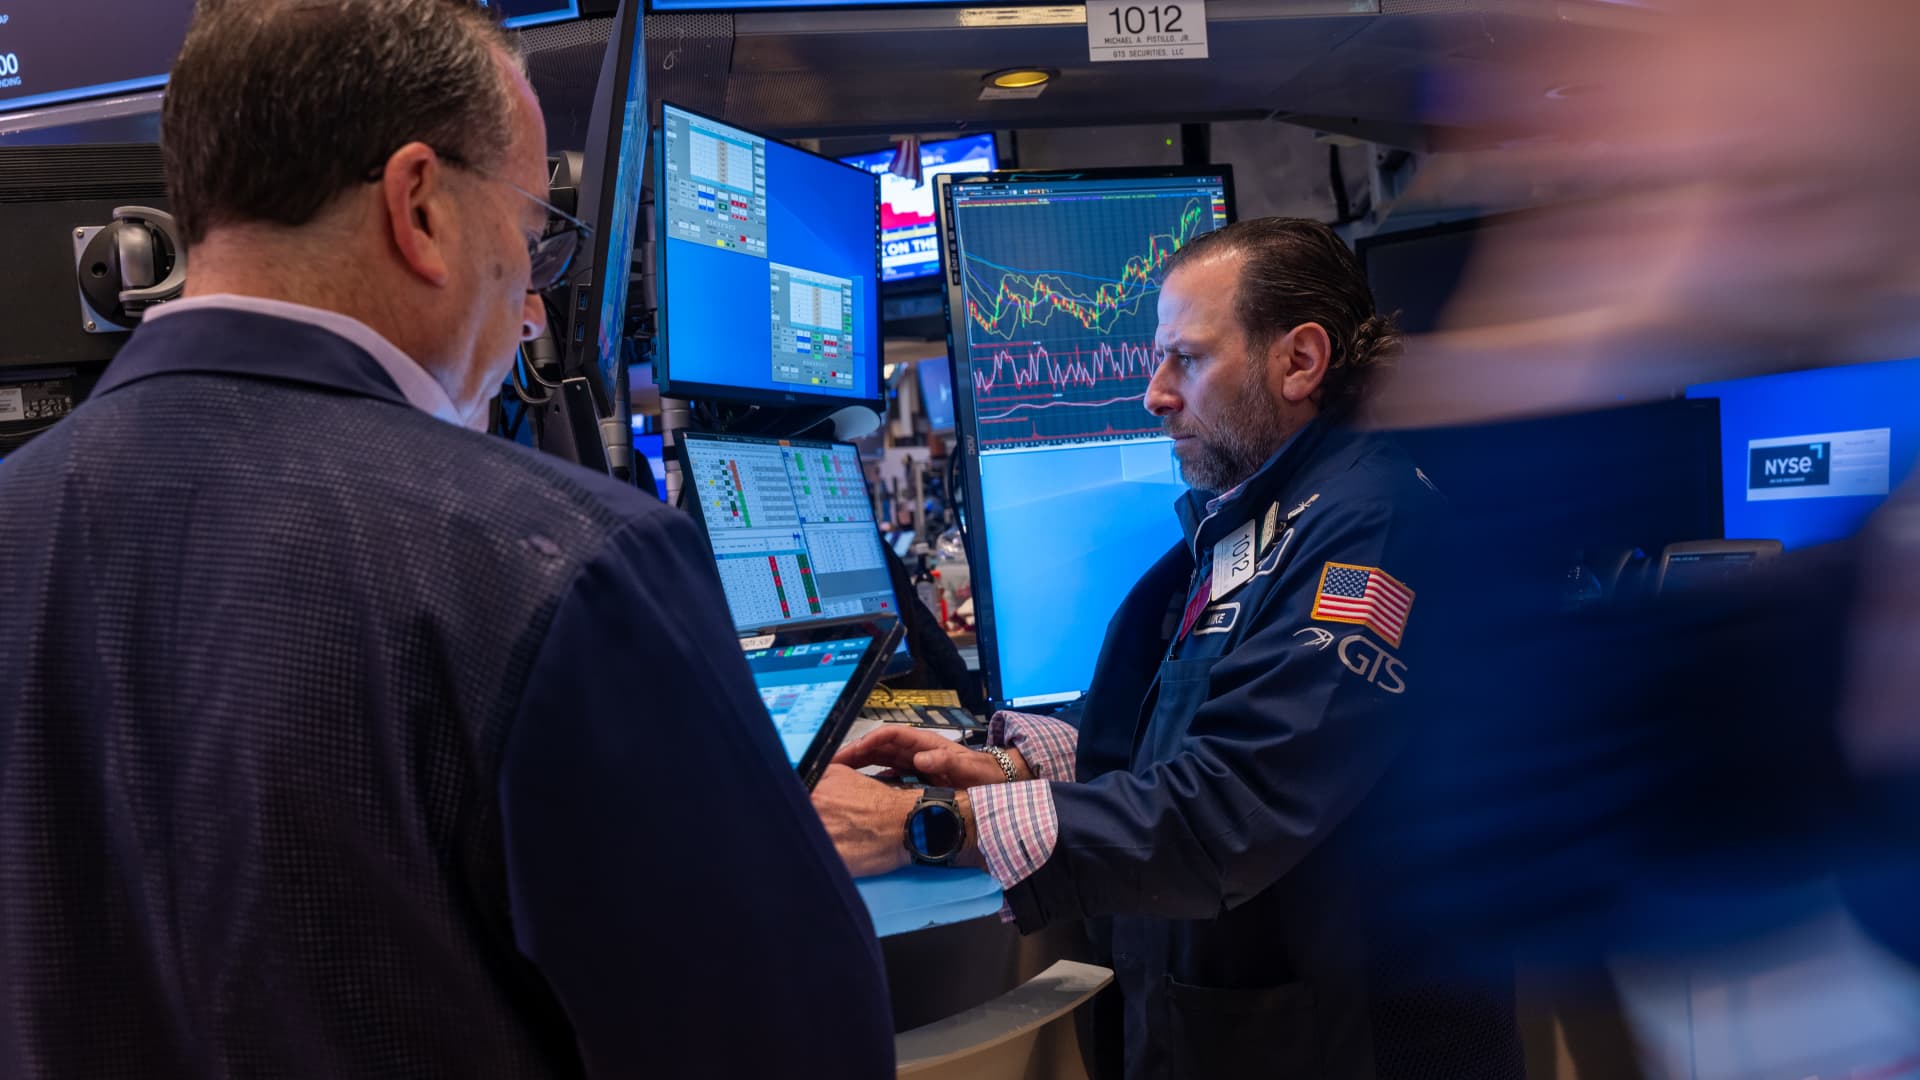 Fed decision, oil plunge, mixed earnings — what we're watching into the stock market close